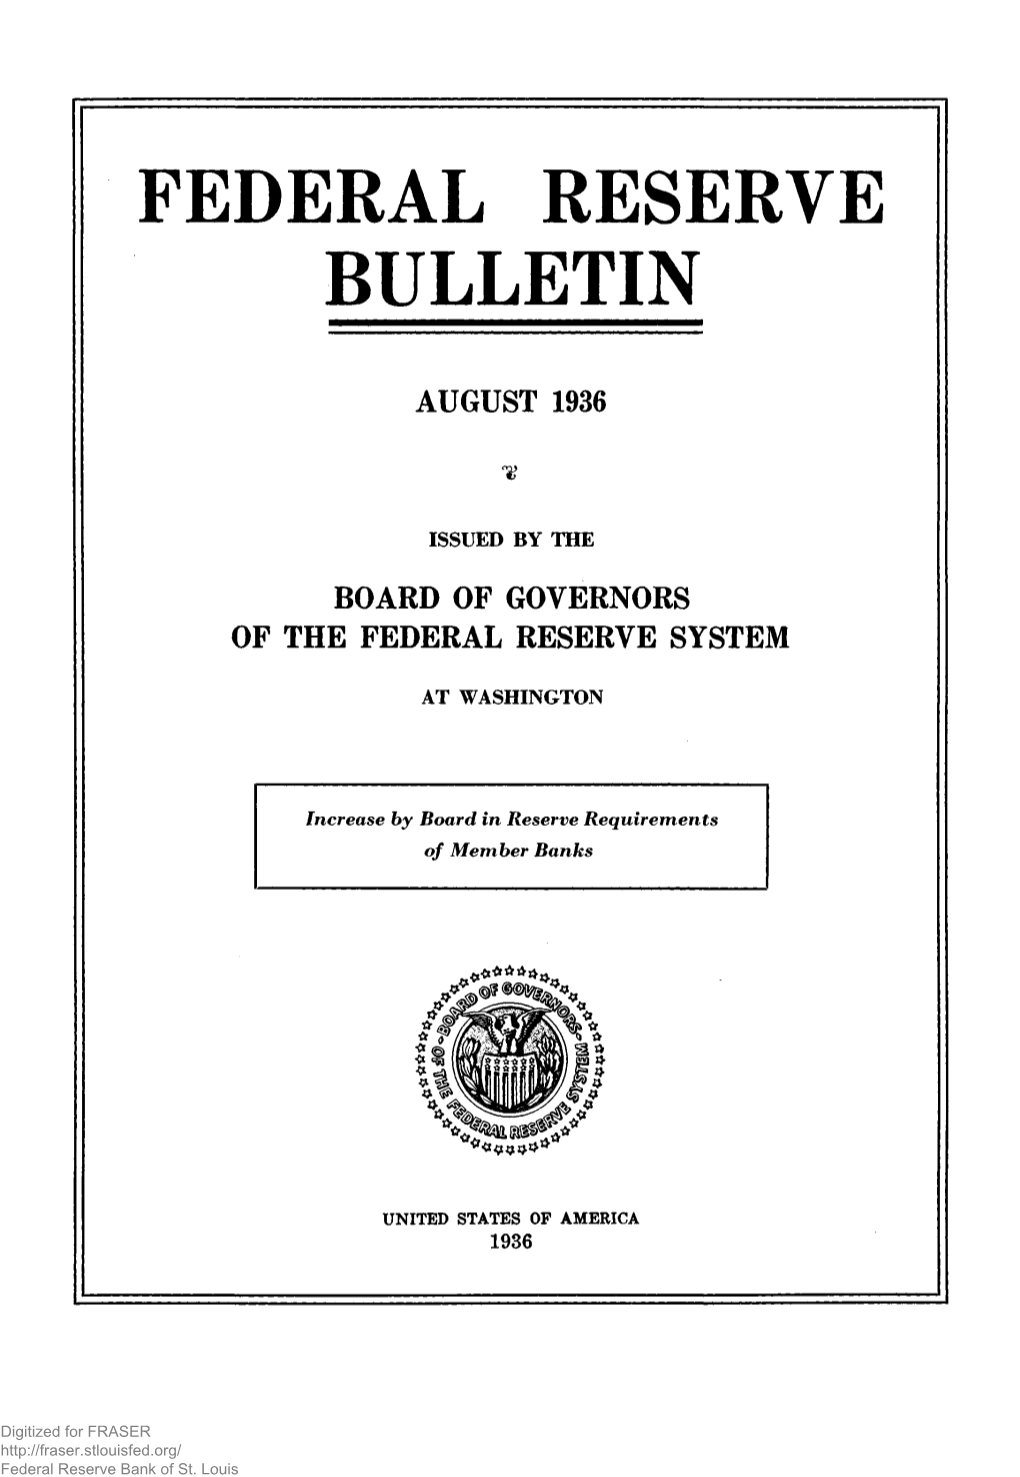 Federal Reserve Bulletin August 1936